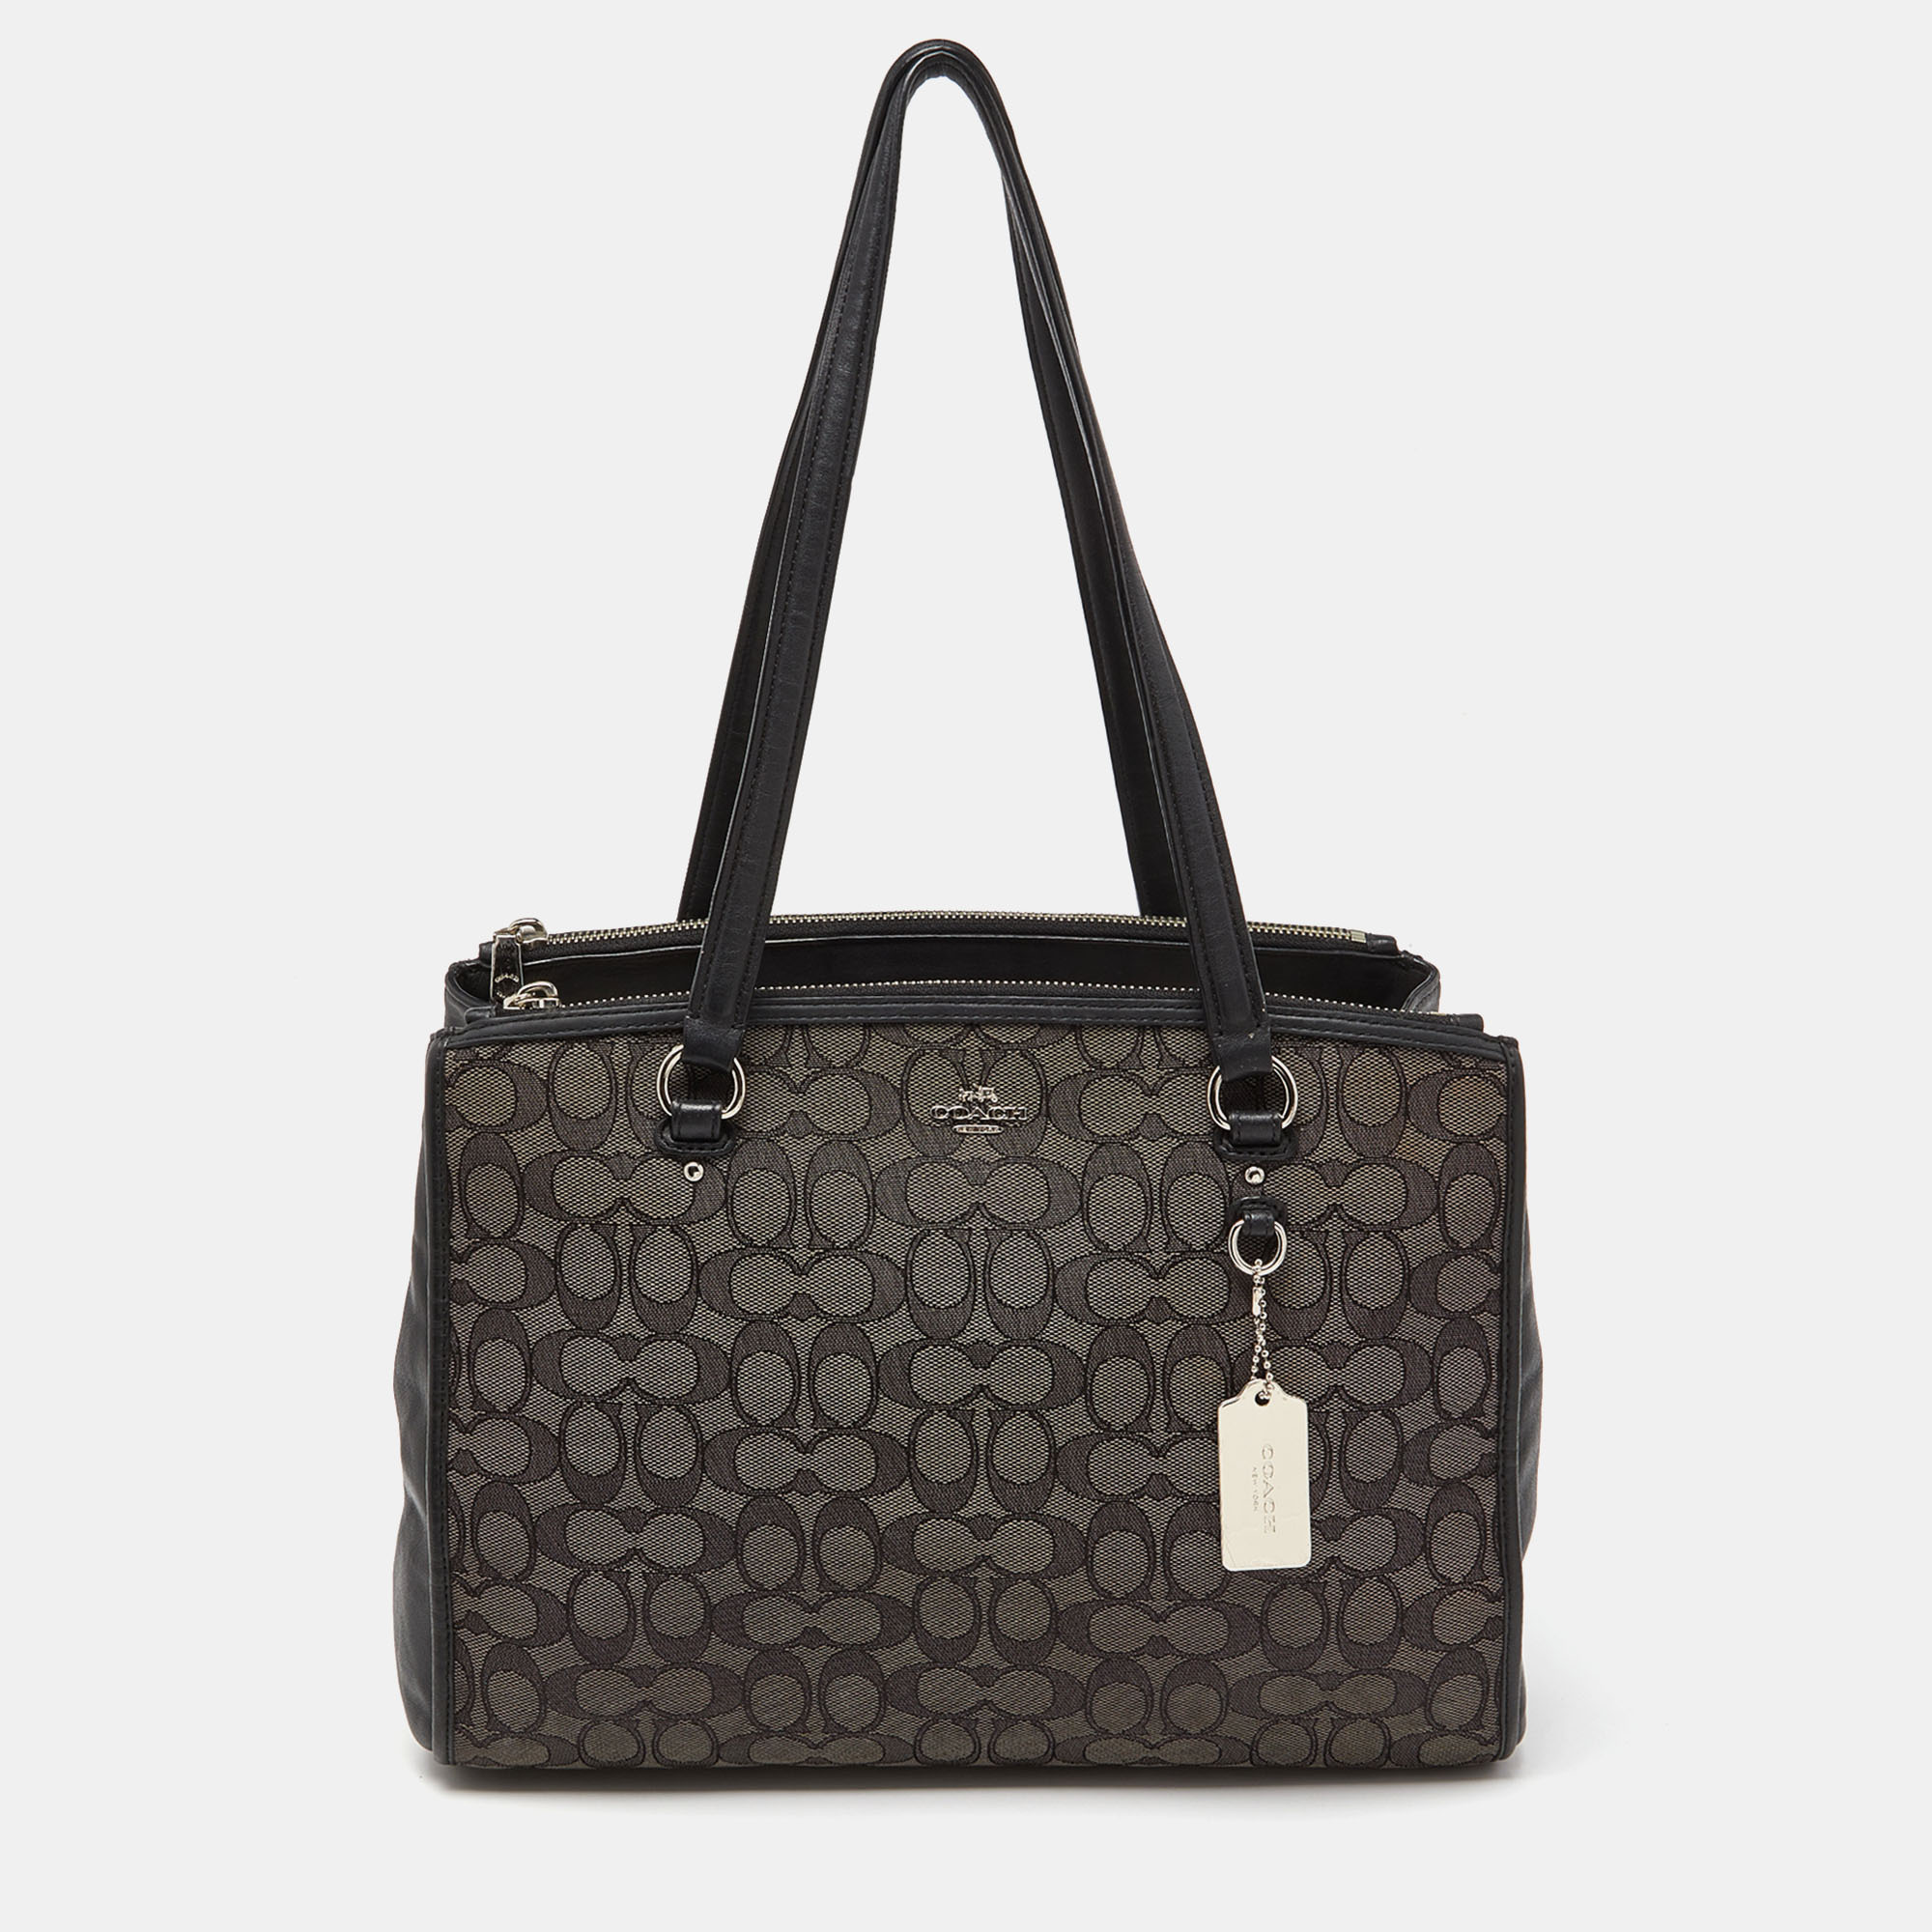 Coach Black/Grey Signature Canvass And Leather Stanton Carryall Shoulder Bag